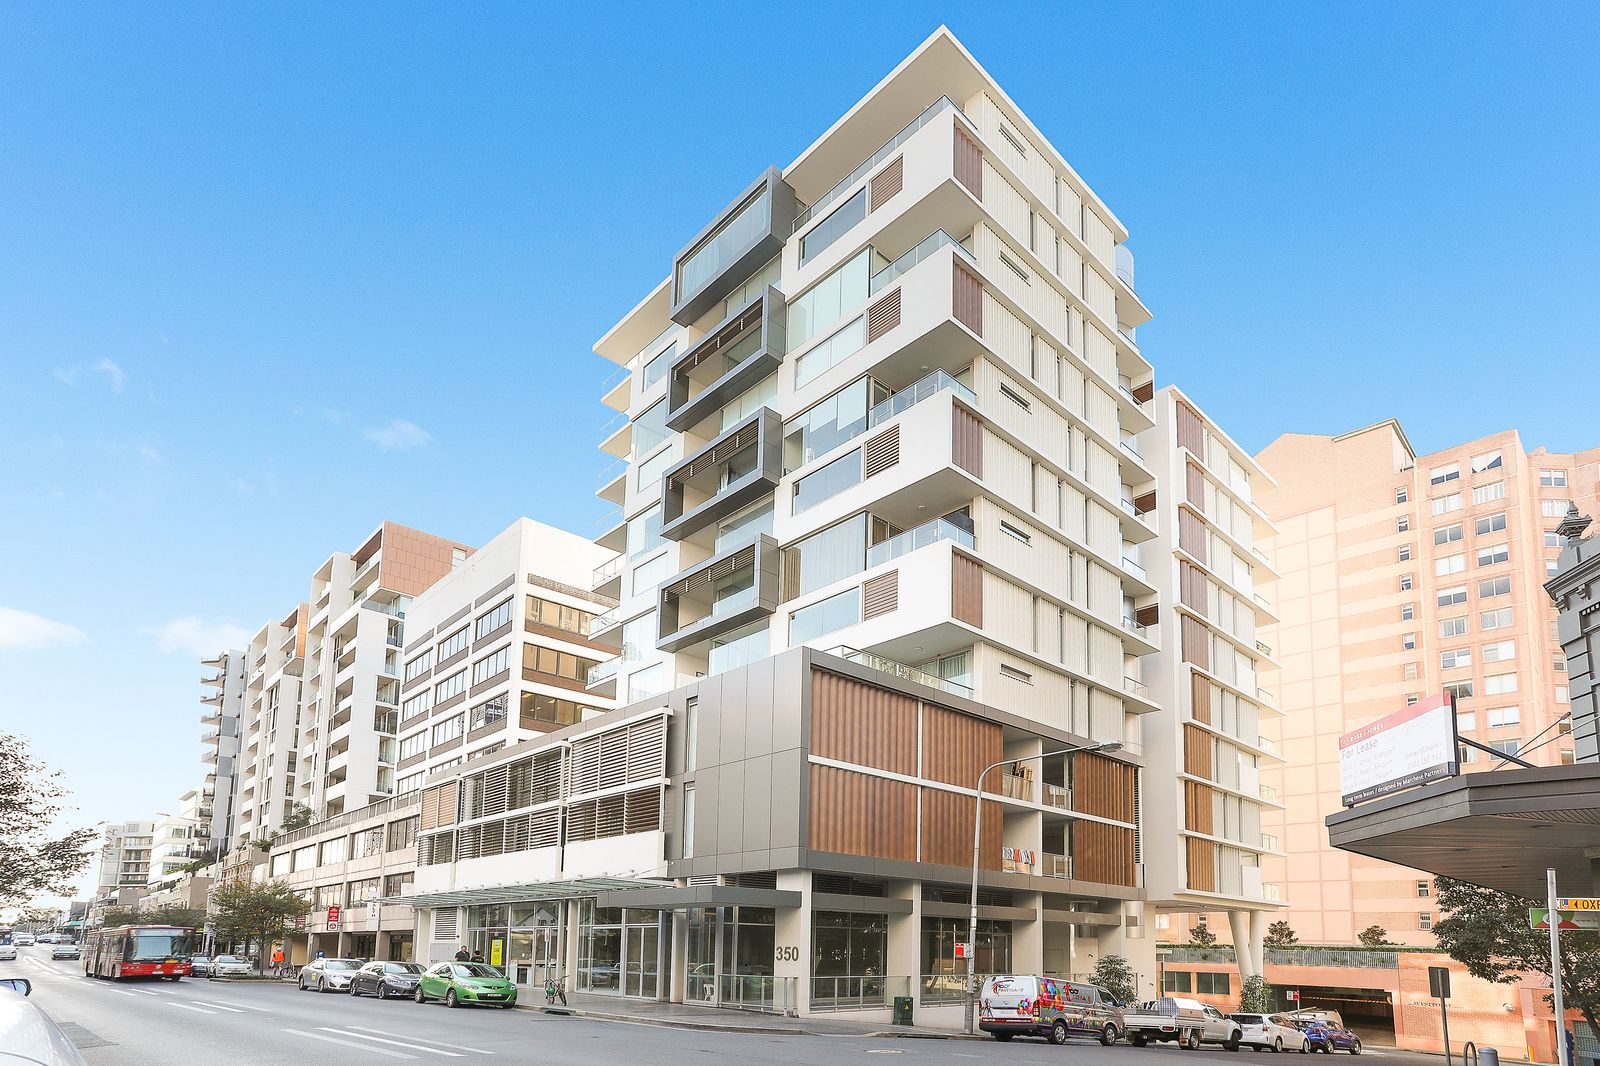 2 bedrooms Apartment / Unit / Flat in 207/350 Oxford St BONDI JUNCTION NSW, 2022